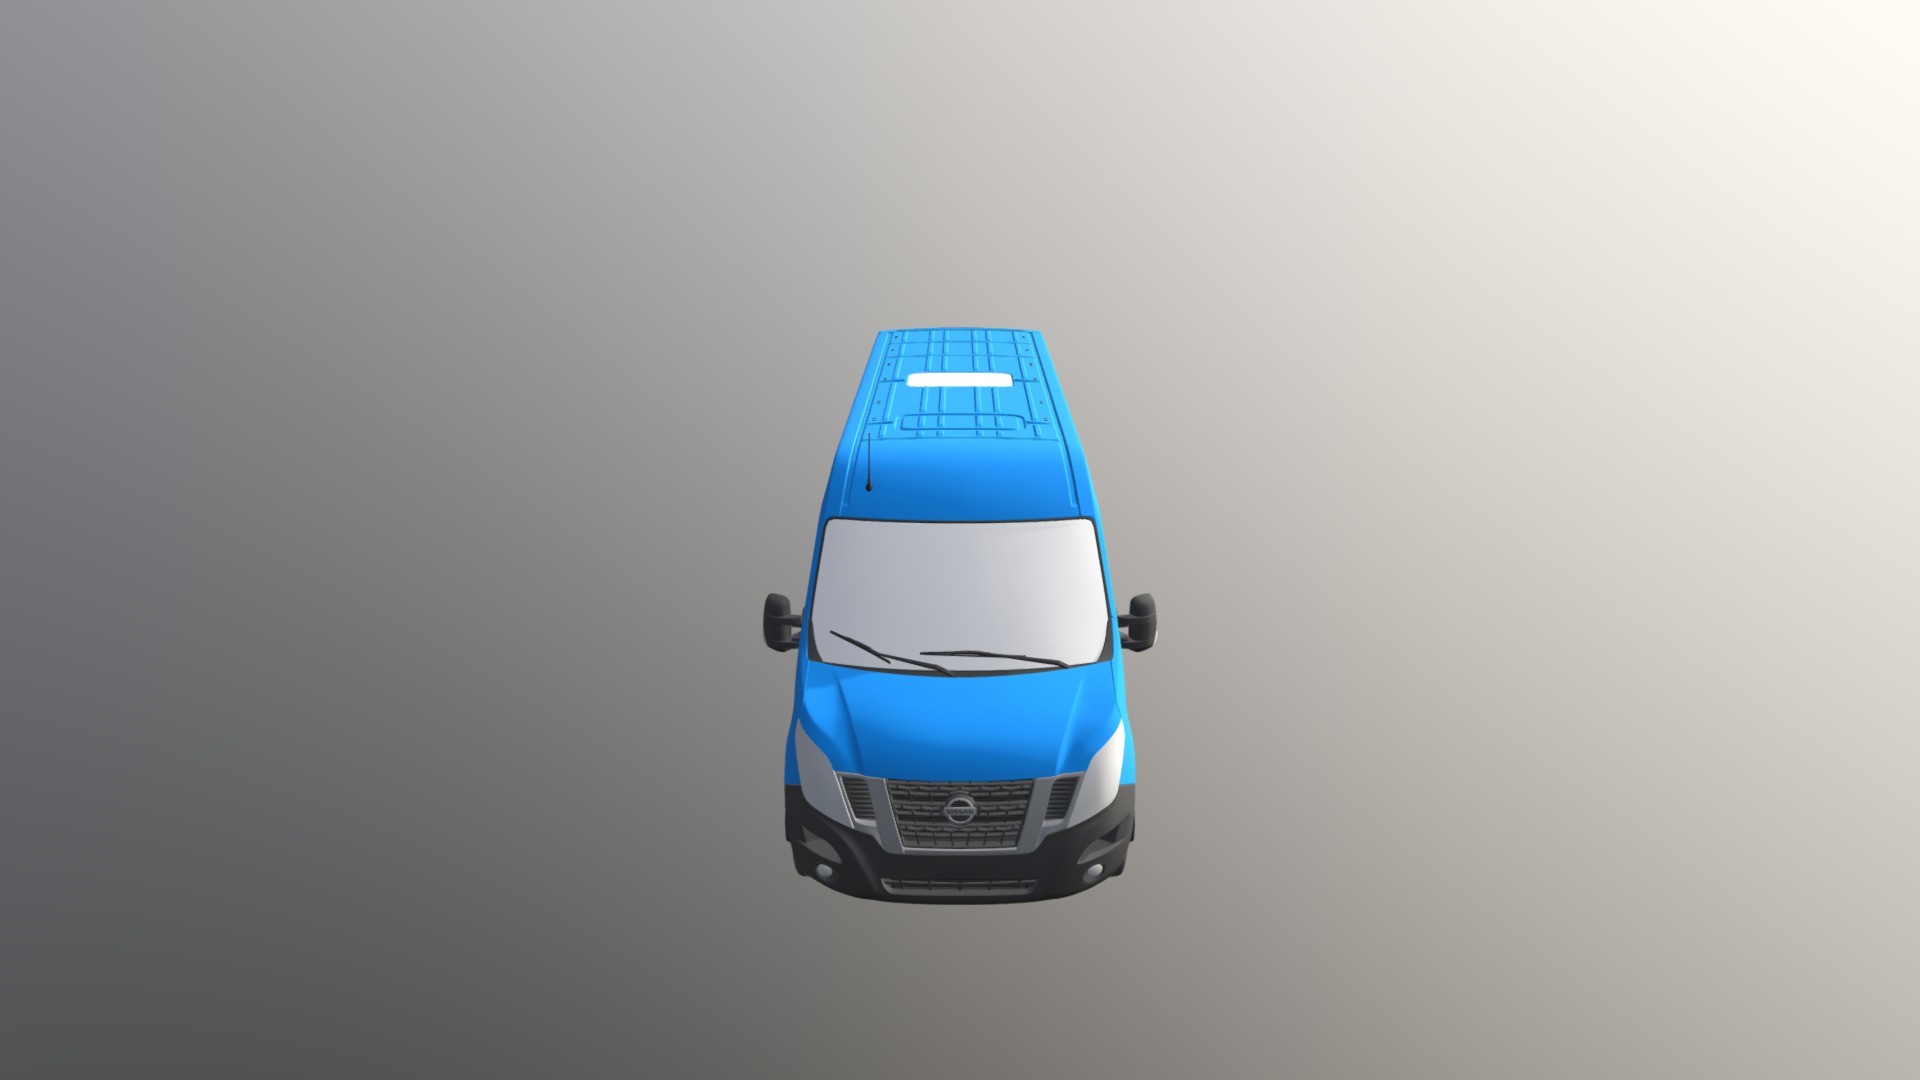 3D model Nissan NV 400 L4H3 Mini Bus 2018 Fbx - This is a 3D model of the Nissan NV 400 L4H3 Mini Bus 2018 Fbx. The 3D model is about a blue and white car.